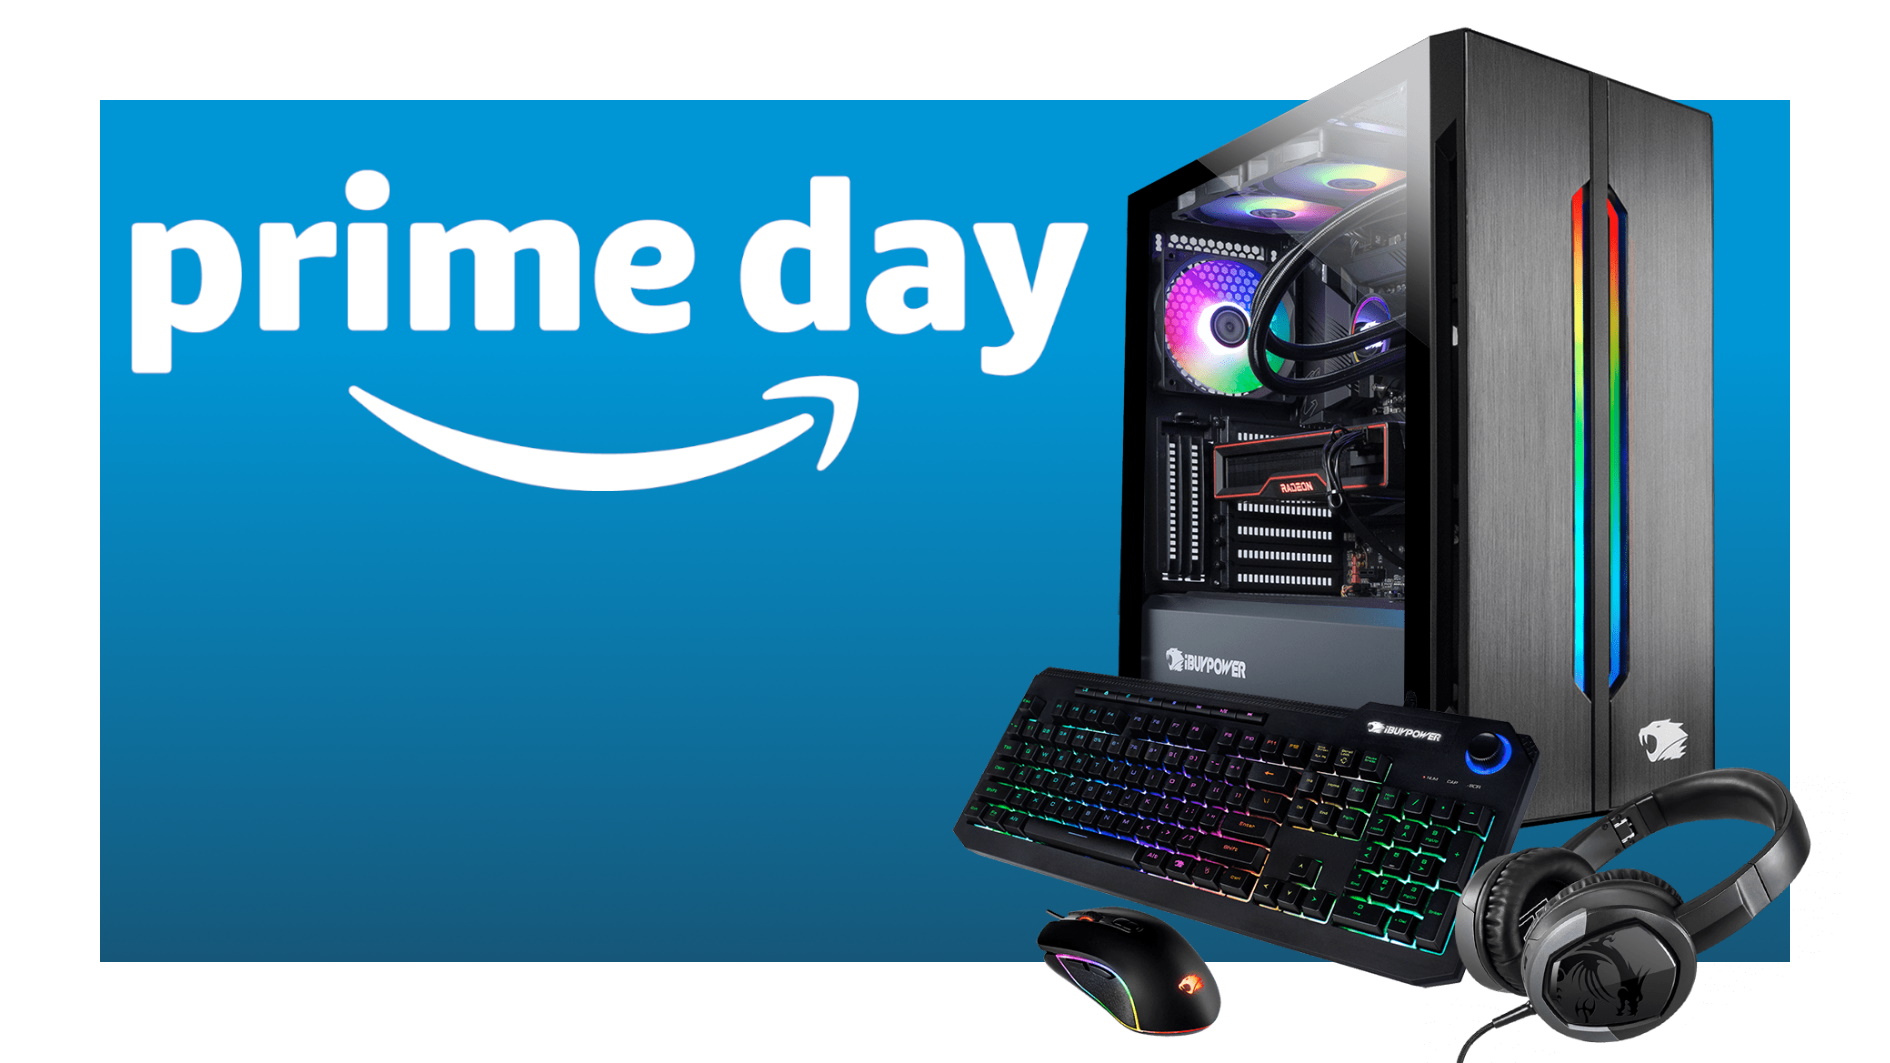  You can't get a new AMD Radeon GPU, right? These ready-to-ship Prime Day gaming PCs disagree 